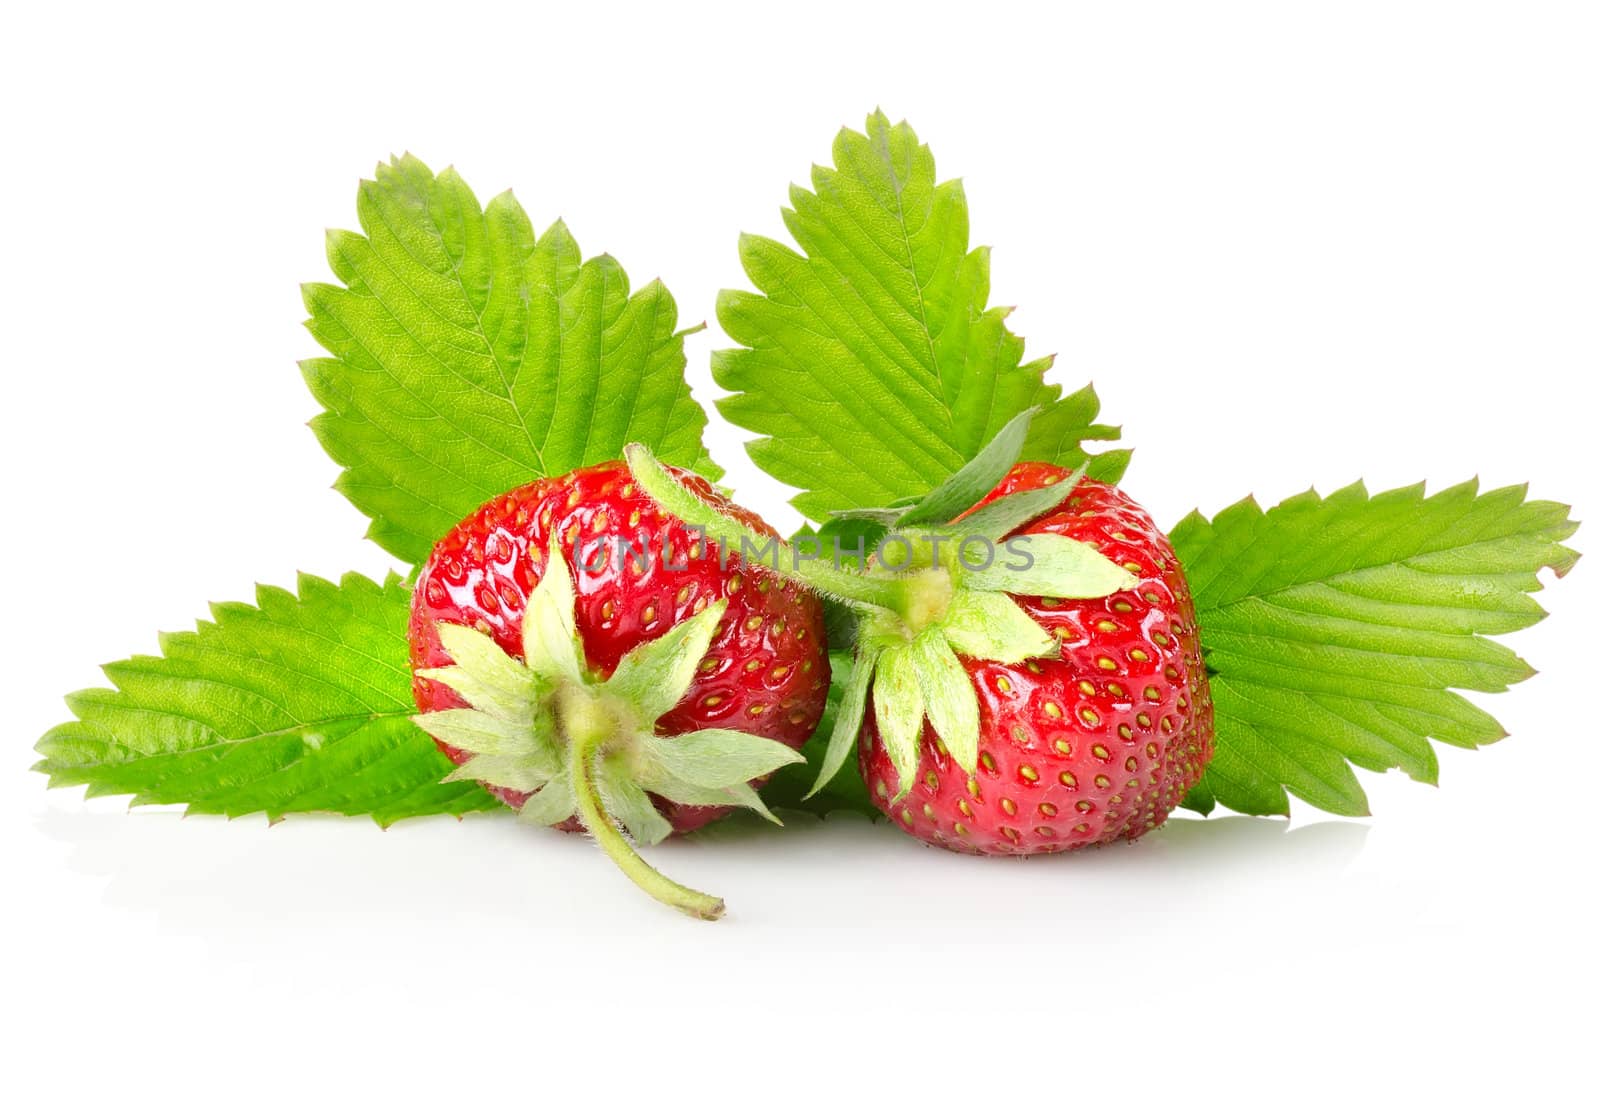 Ripe strawberries with leaves by Givaga